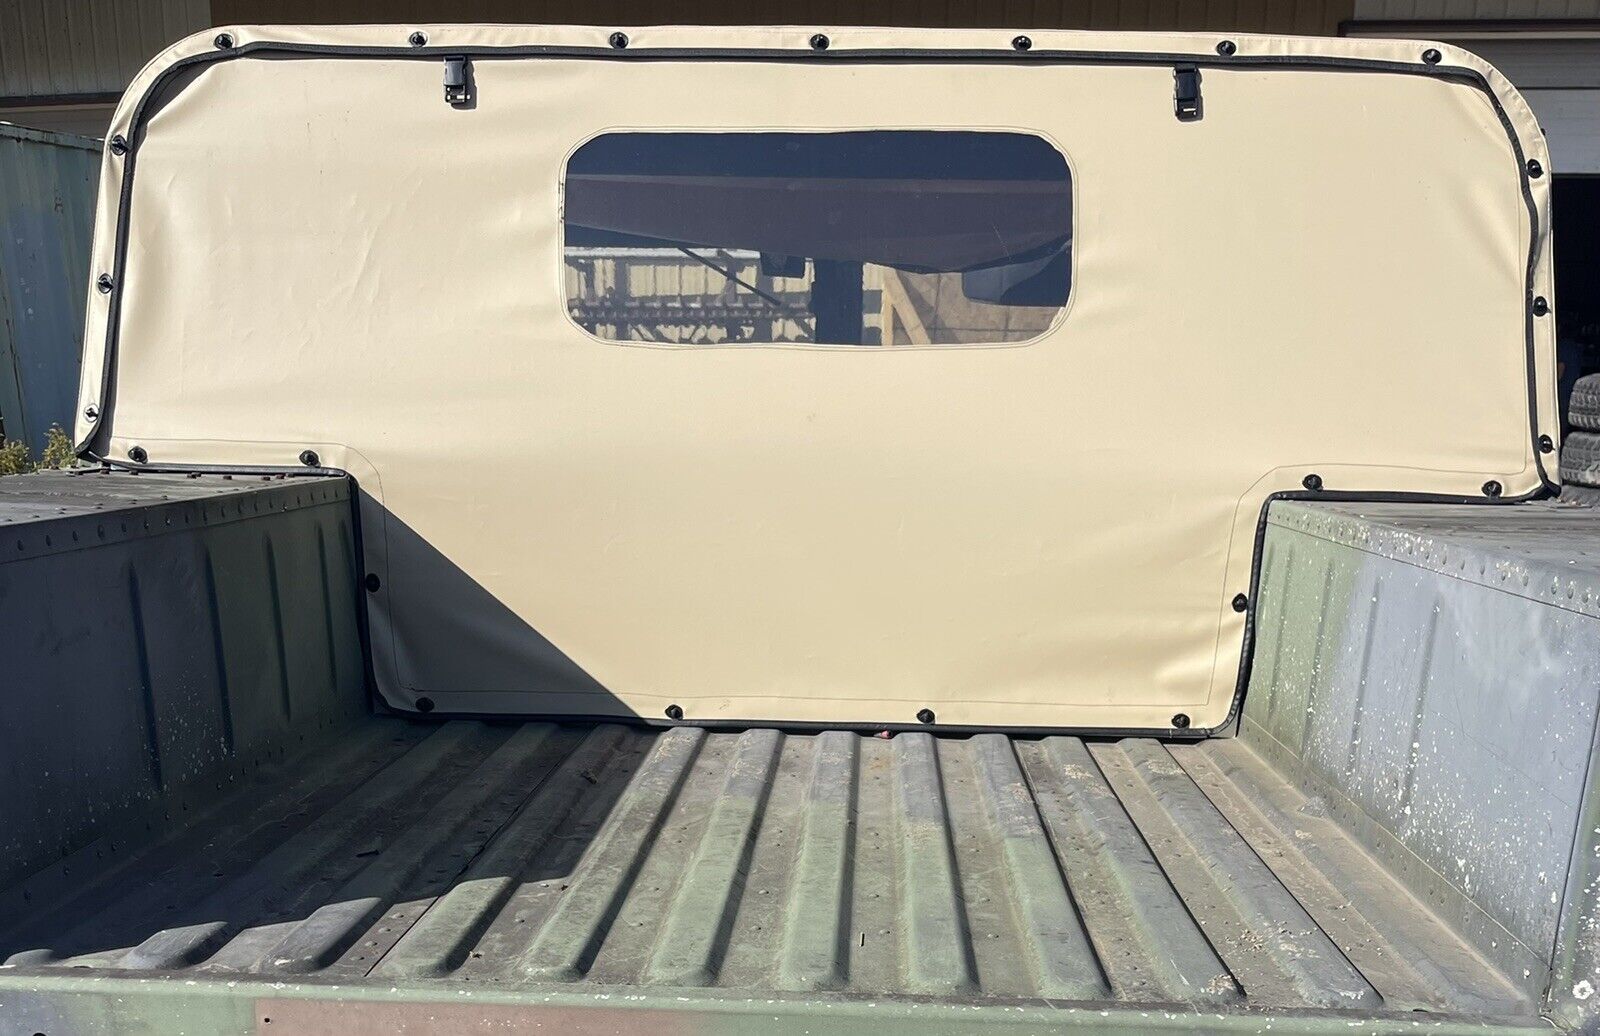 NEW Military Humvee Removable Canvas Rear Curtain Seals Tight- Desert Tan